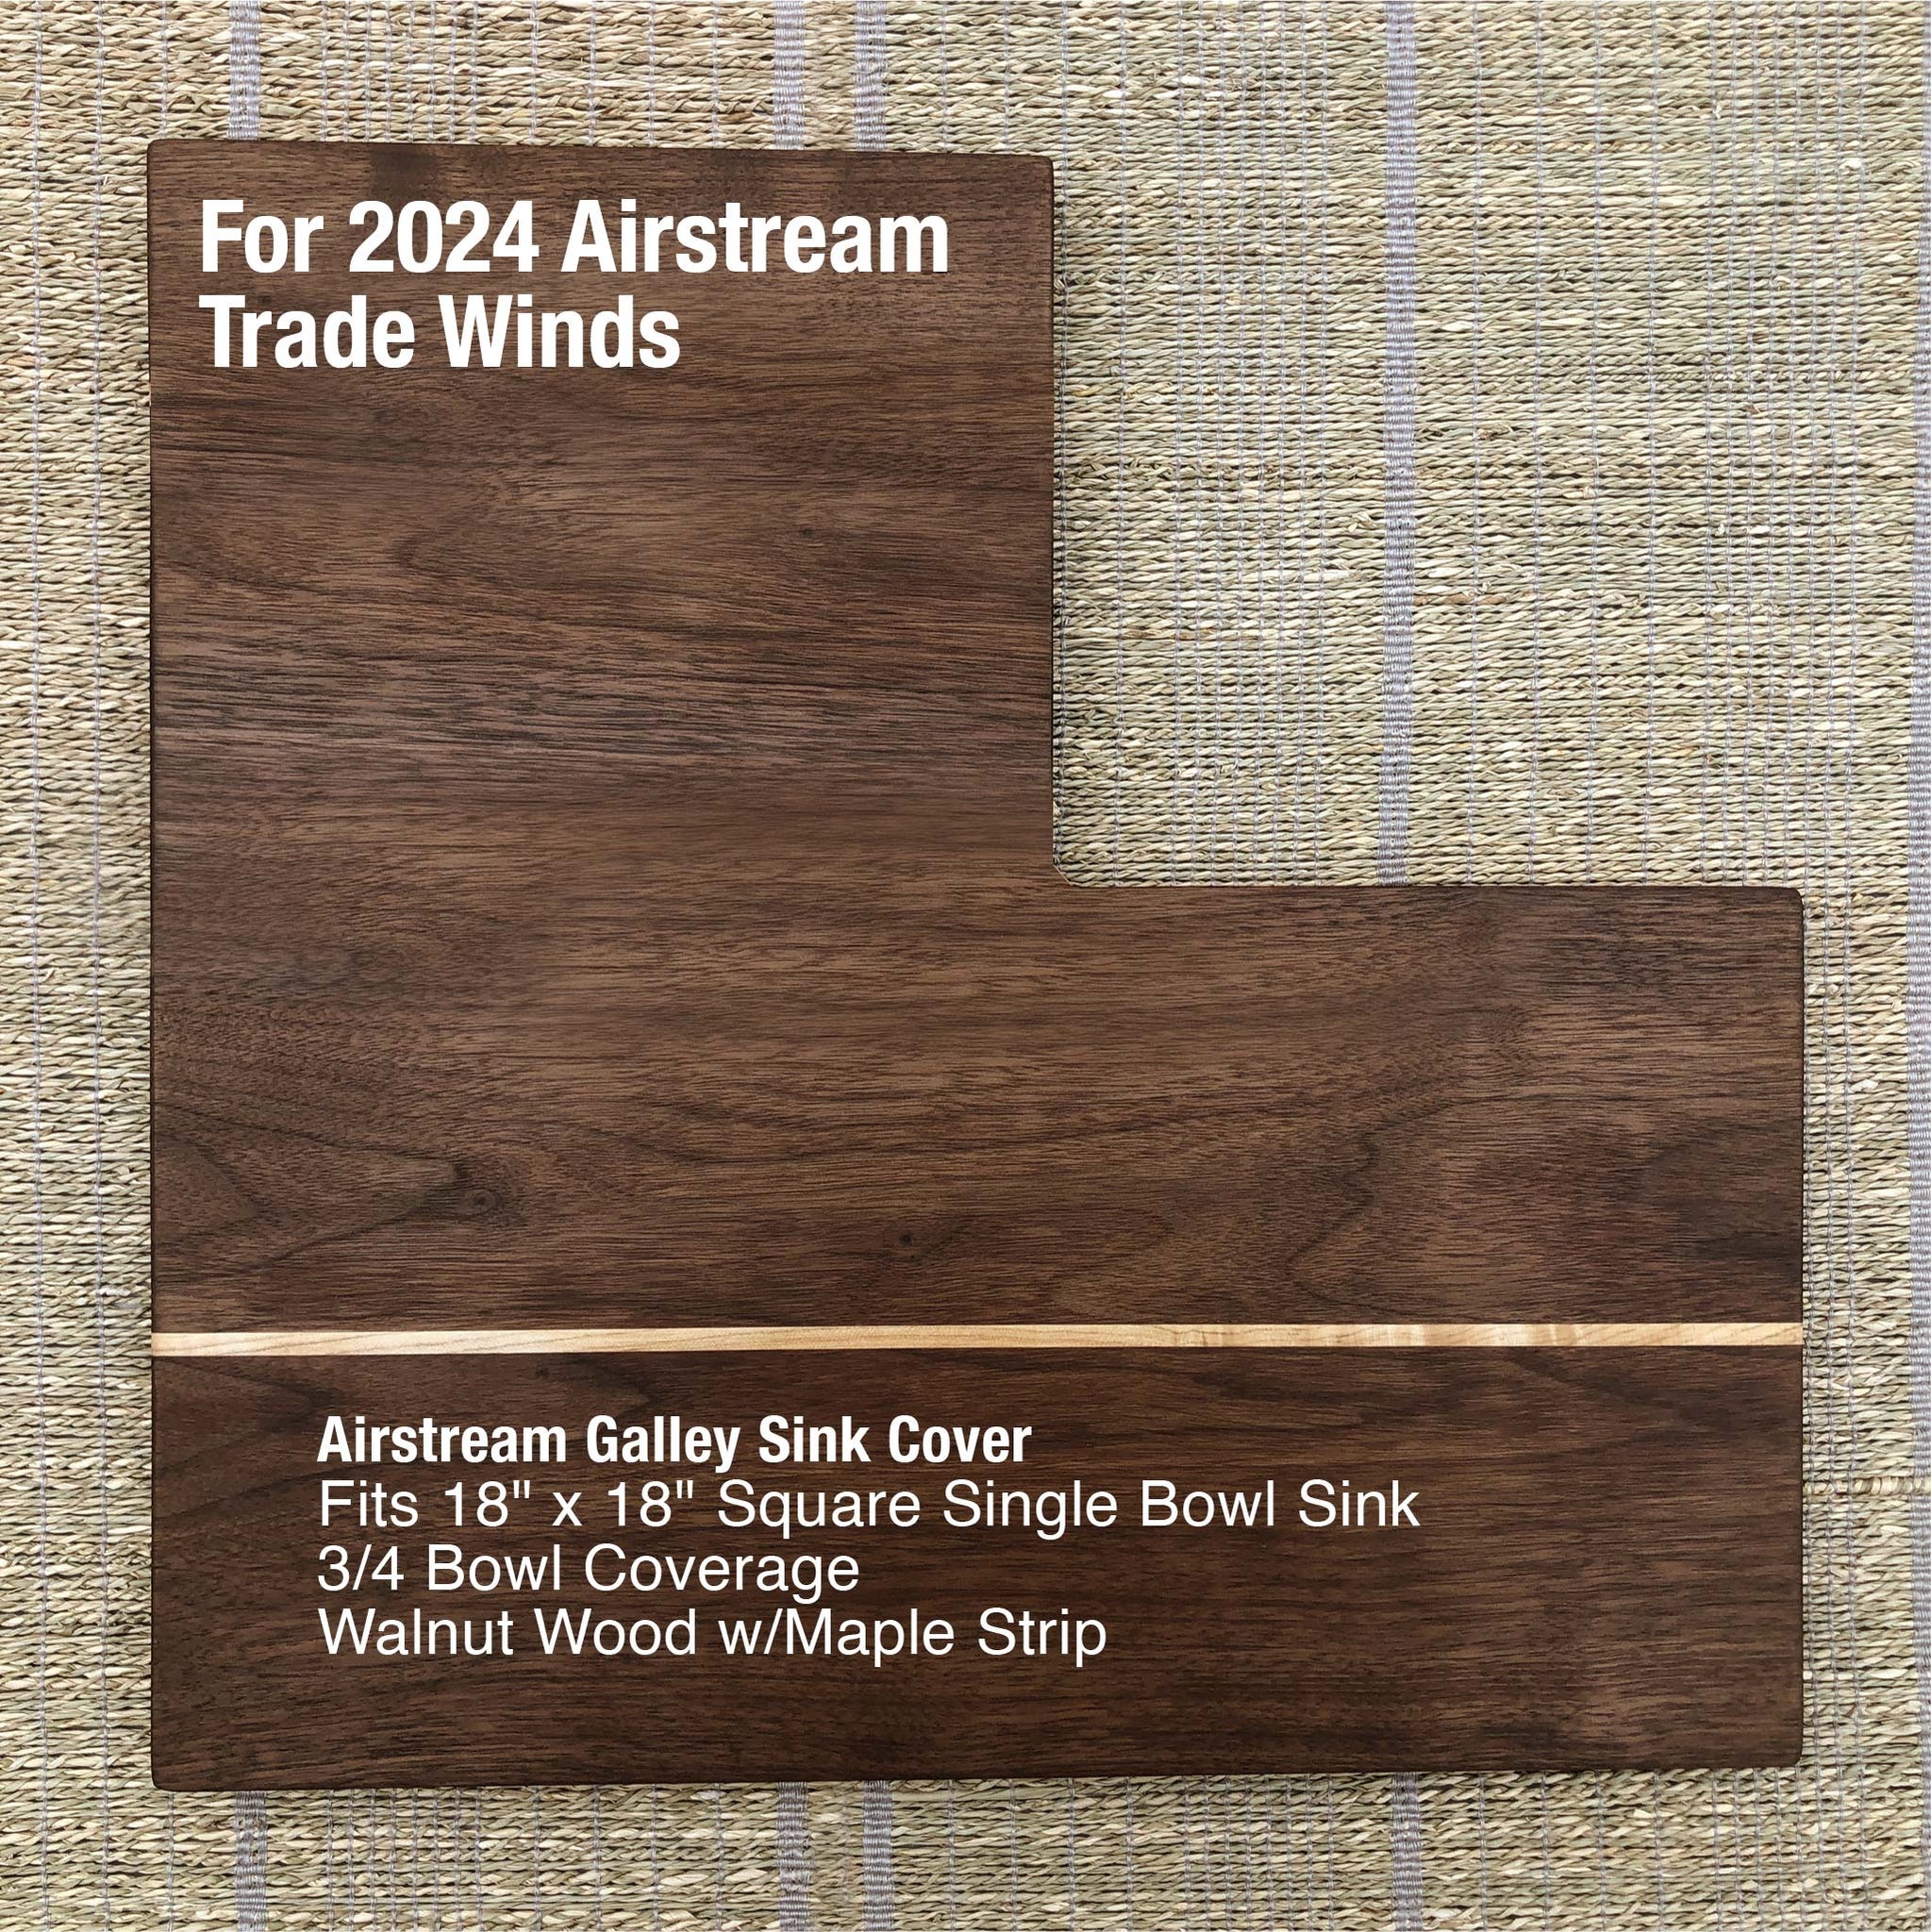 Airstream Trade Wind Sink Cover, 2024, 18"x18" Square Sink, Airstream Decor, Gift - Shop Matson